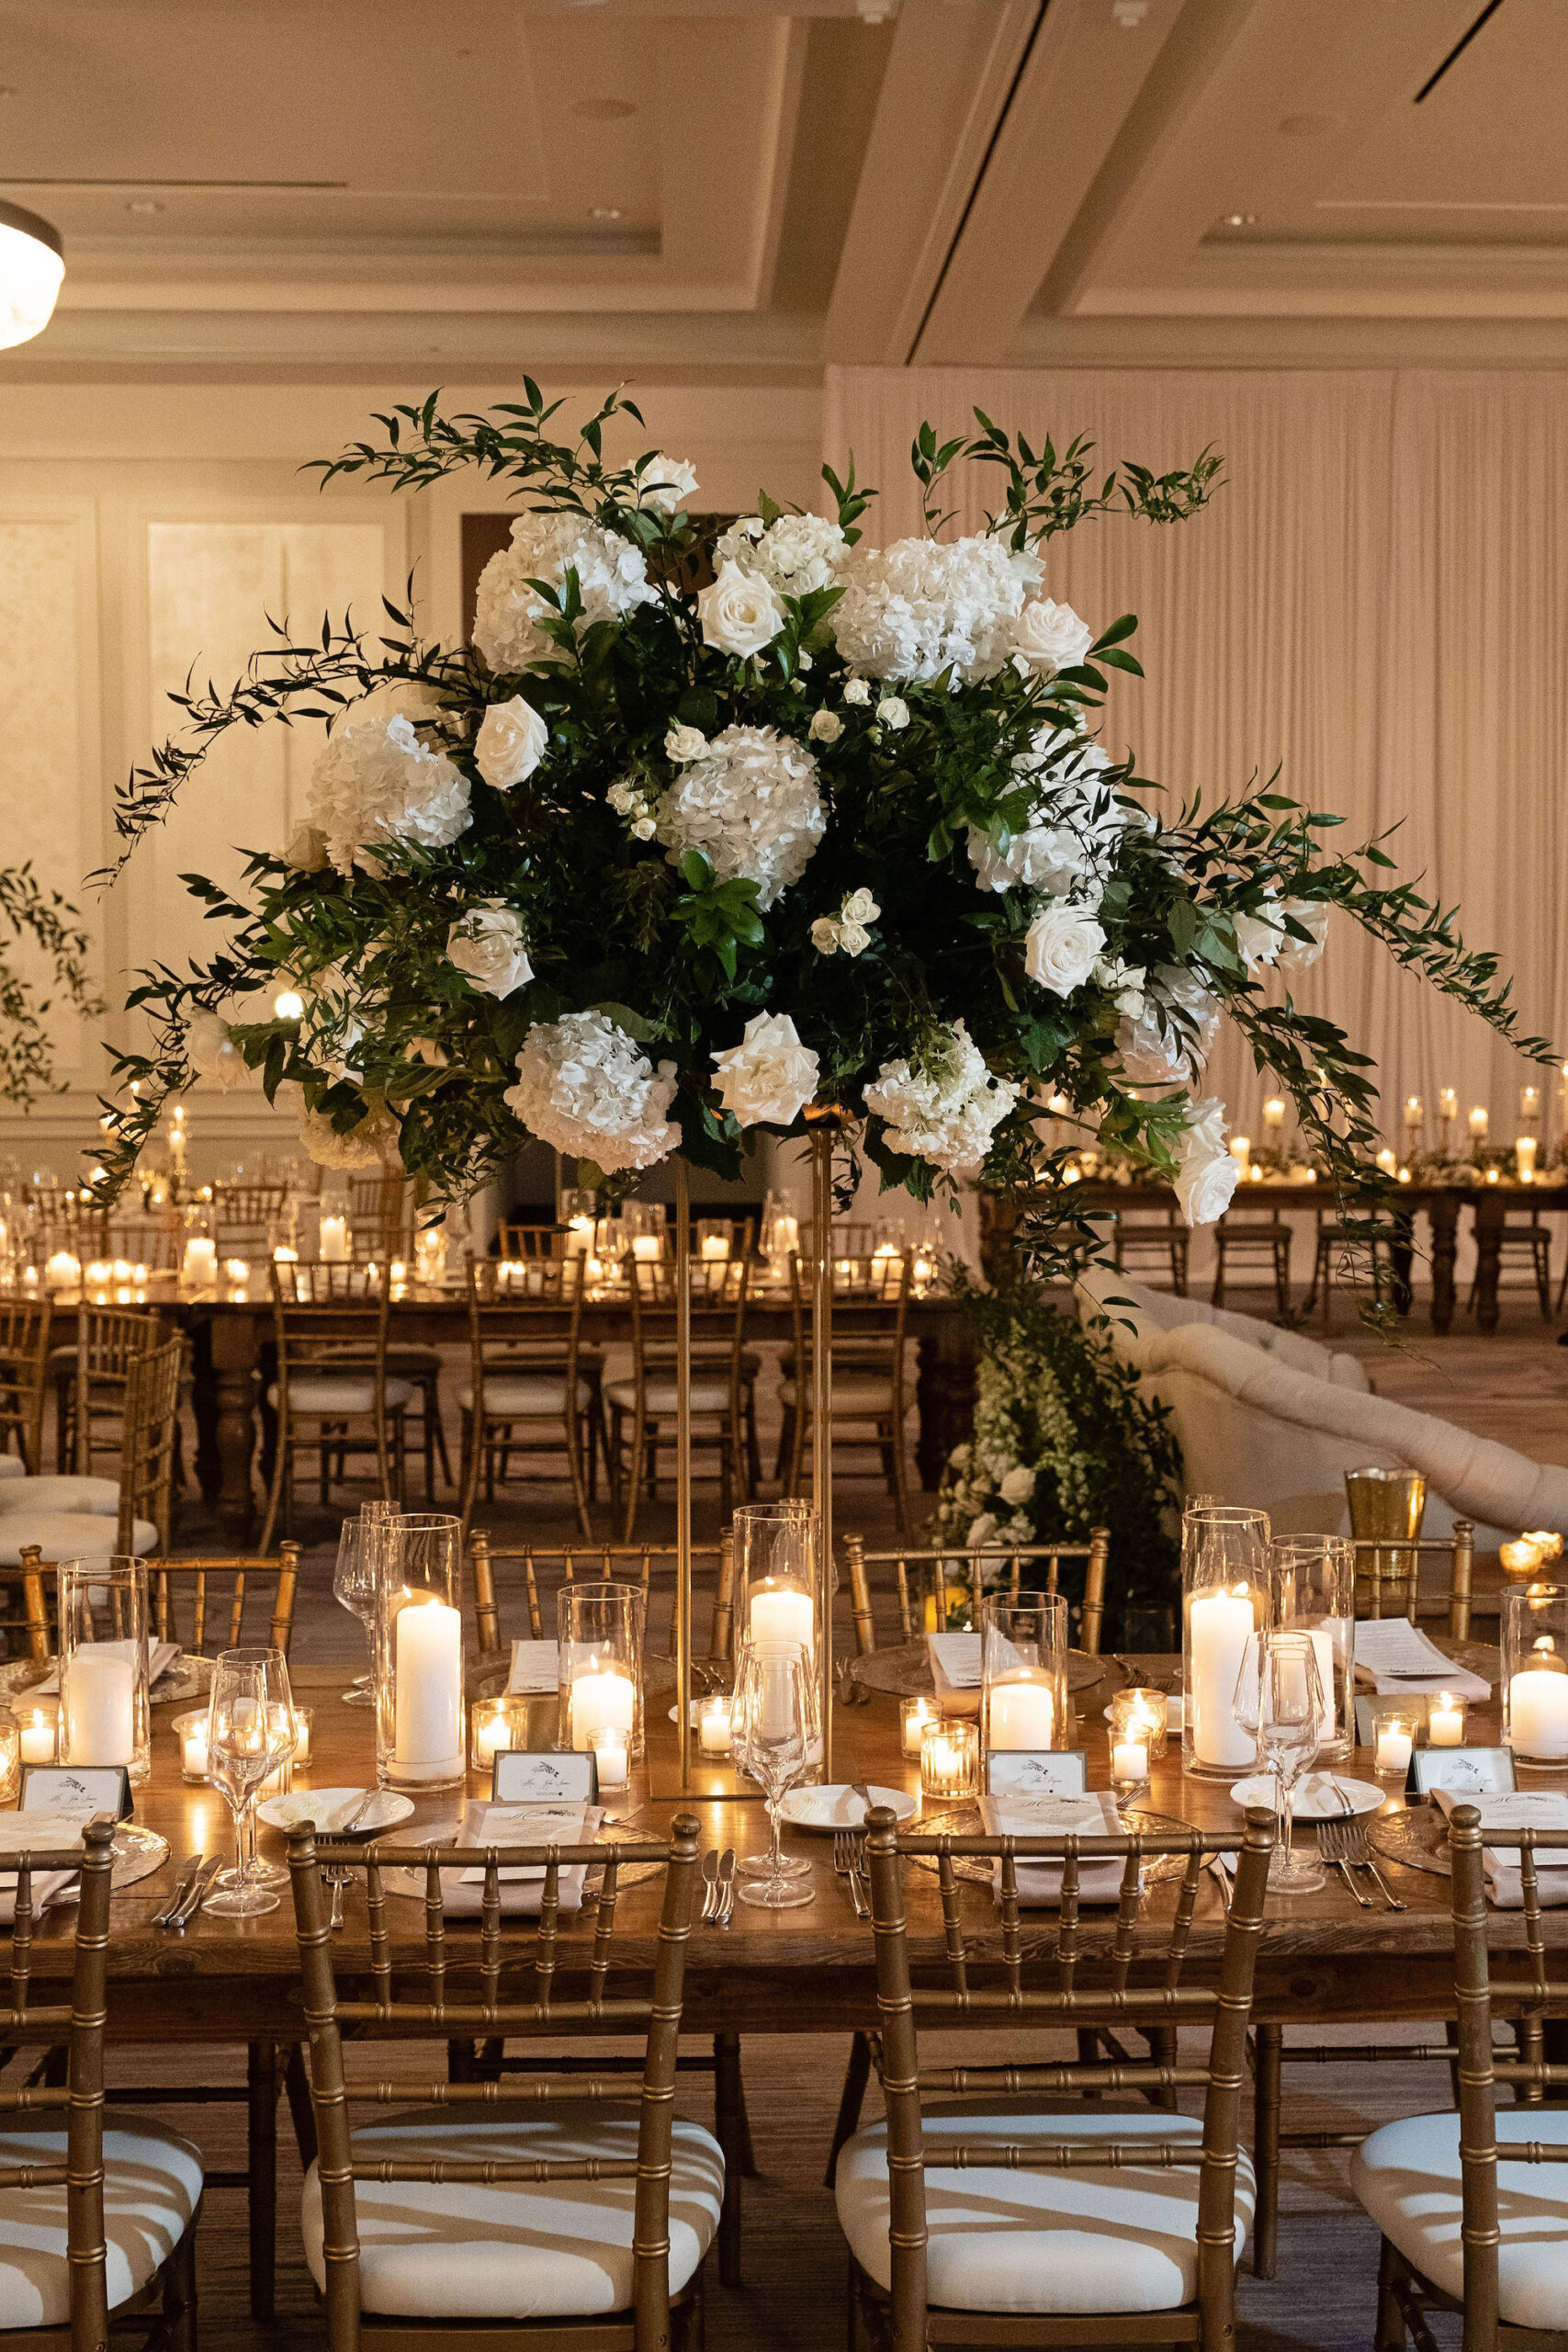 Elegant White Hydrangea and Rose Floral Arrangements with Ruscus Greenery | Candlelit Centerpieces | St. Pete Florist Bruce Wayne Florals